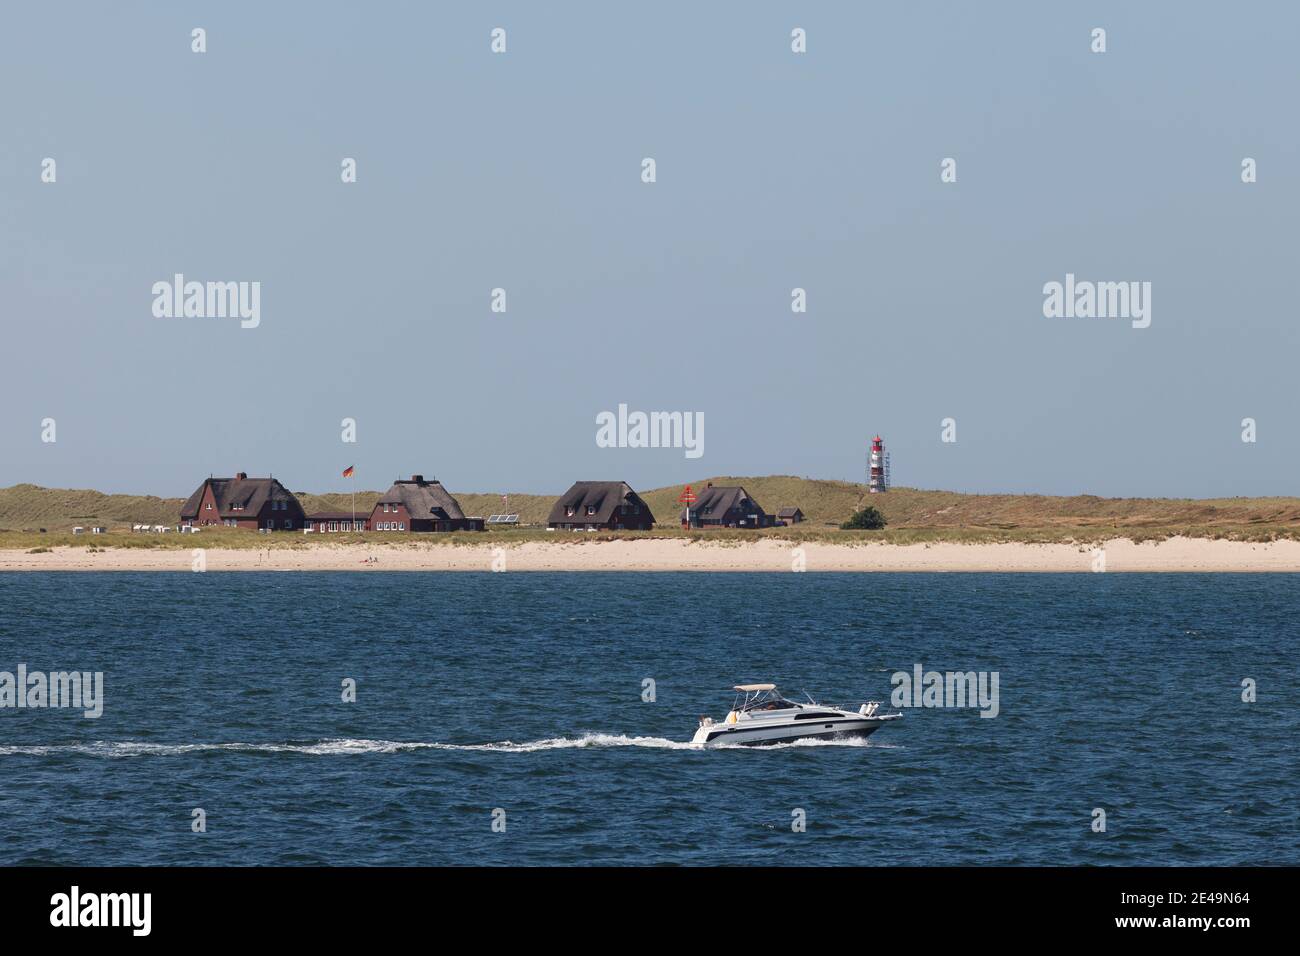 Yacht sails in front of thatched roof houses at the Elbow with a light tower in the background on the island of Sylt in the North Sea, North Friesland, Schleswig-Holstein, Germany Stock Photo